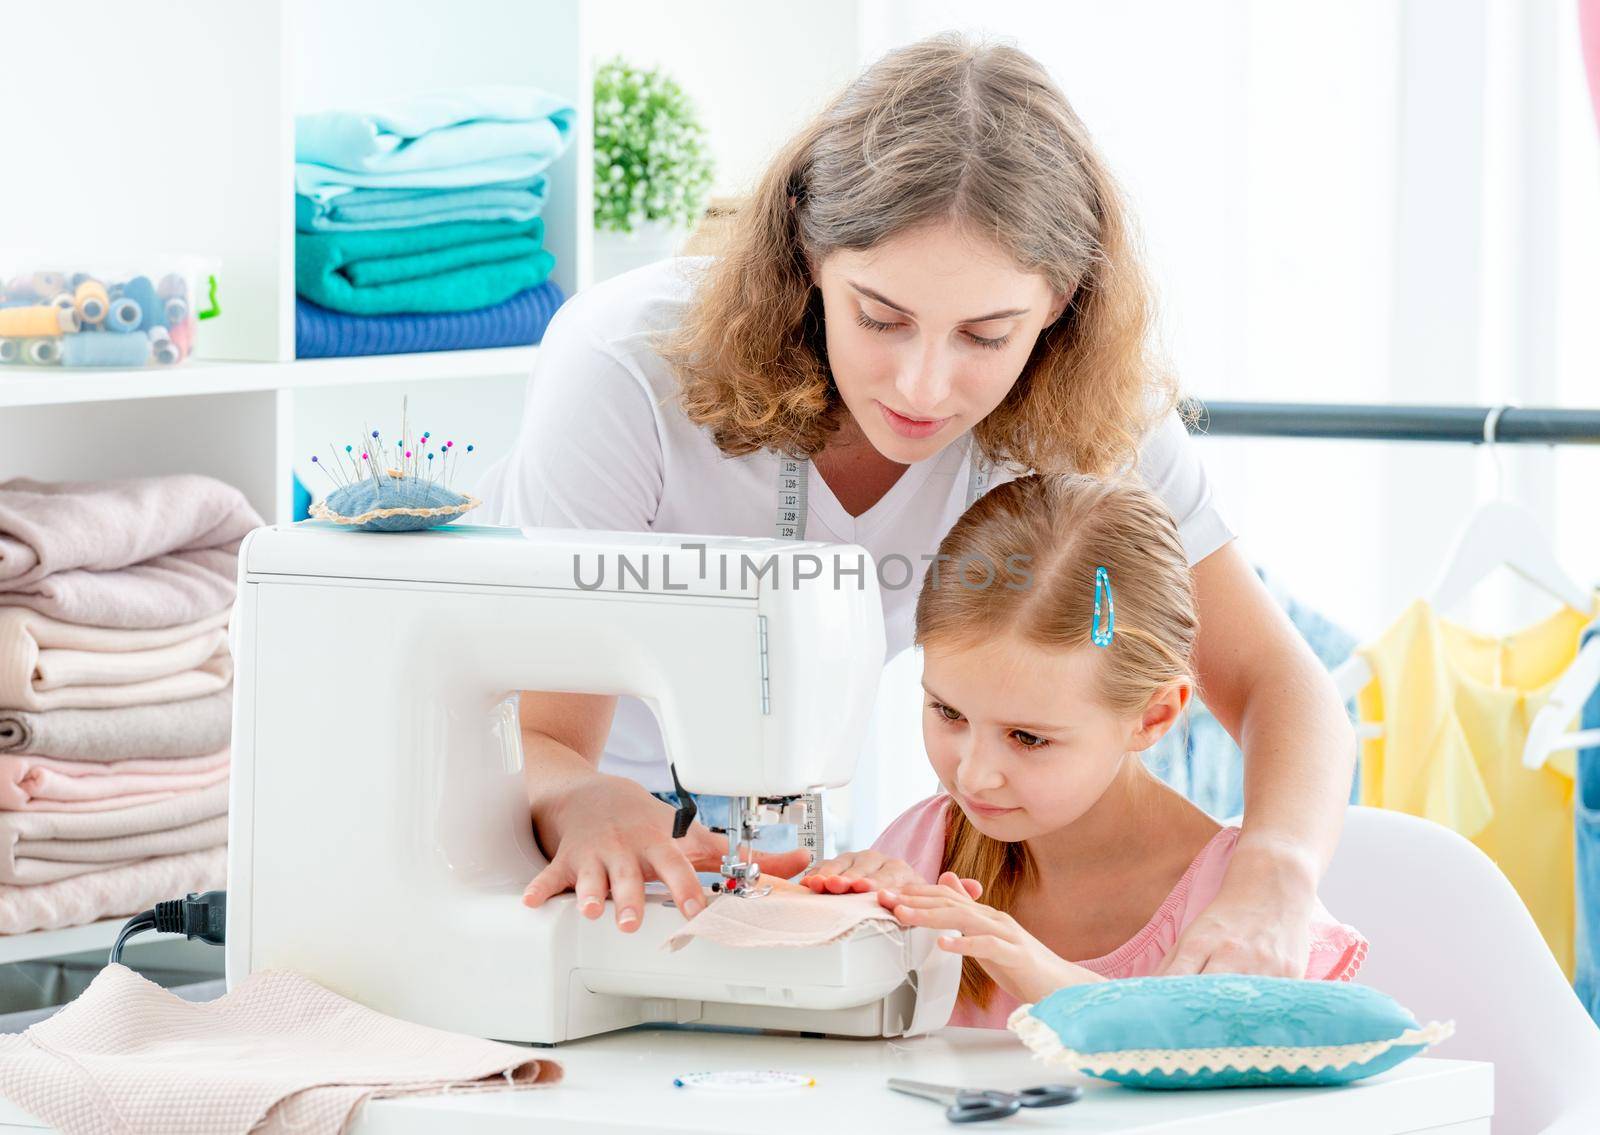 Mother and daughter are sewing on sewing machine at home